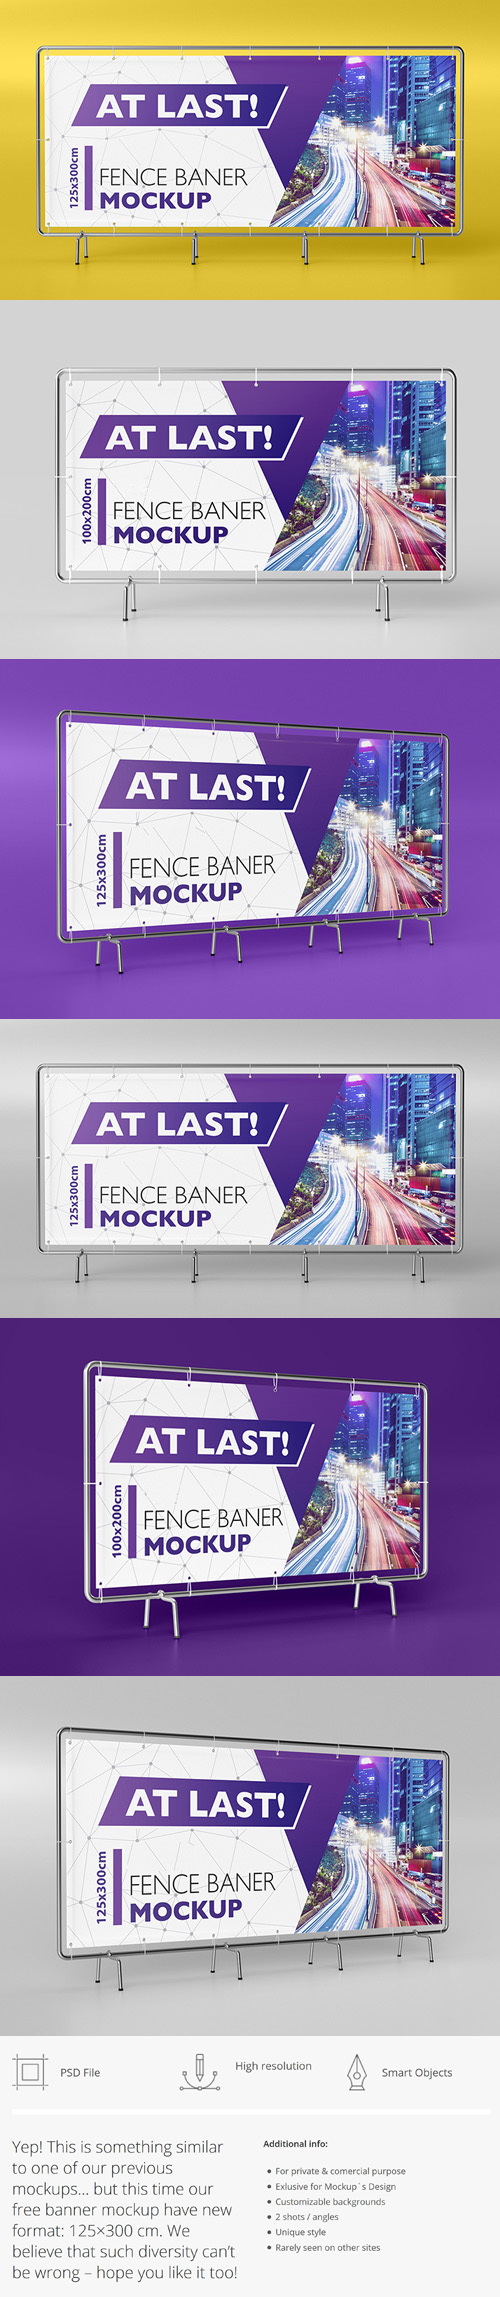 Fence Banners - 4 PSD Mockups